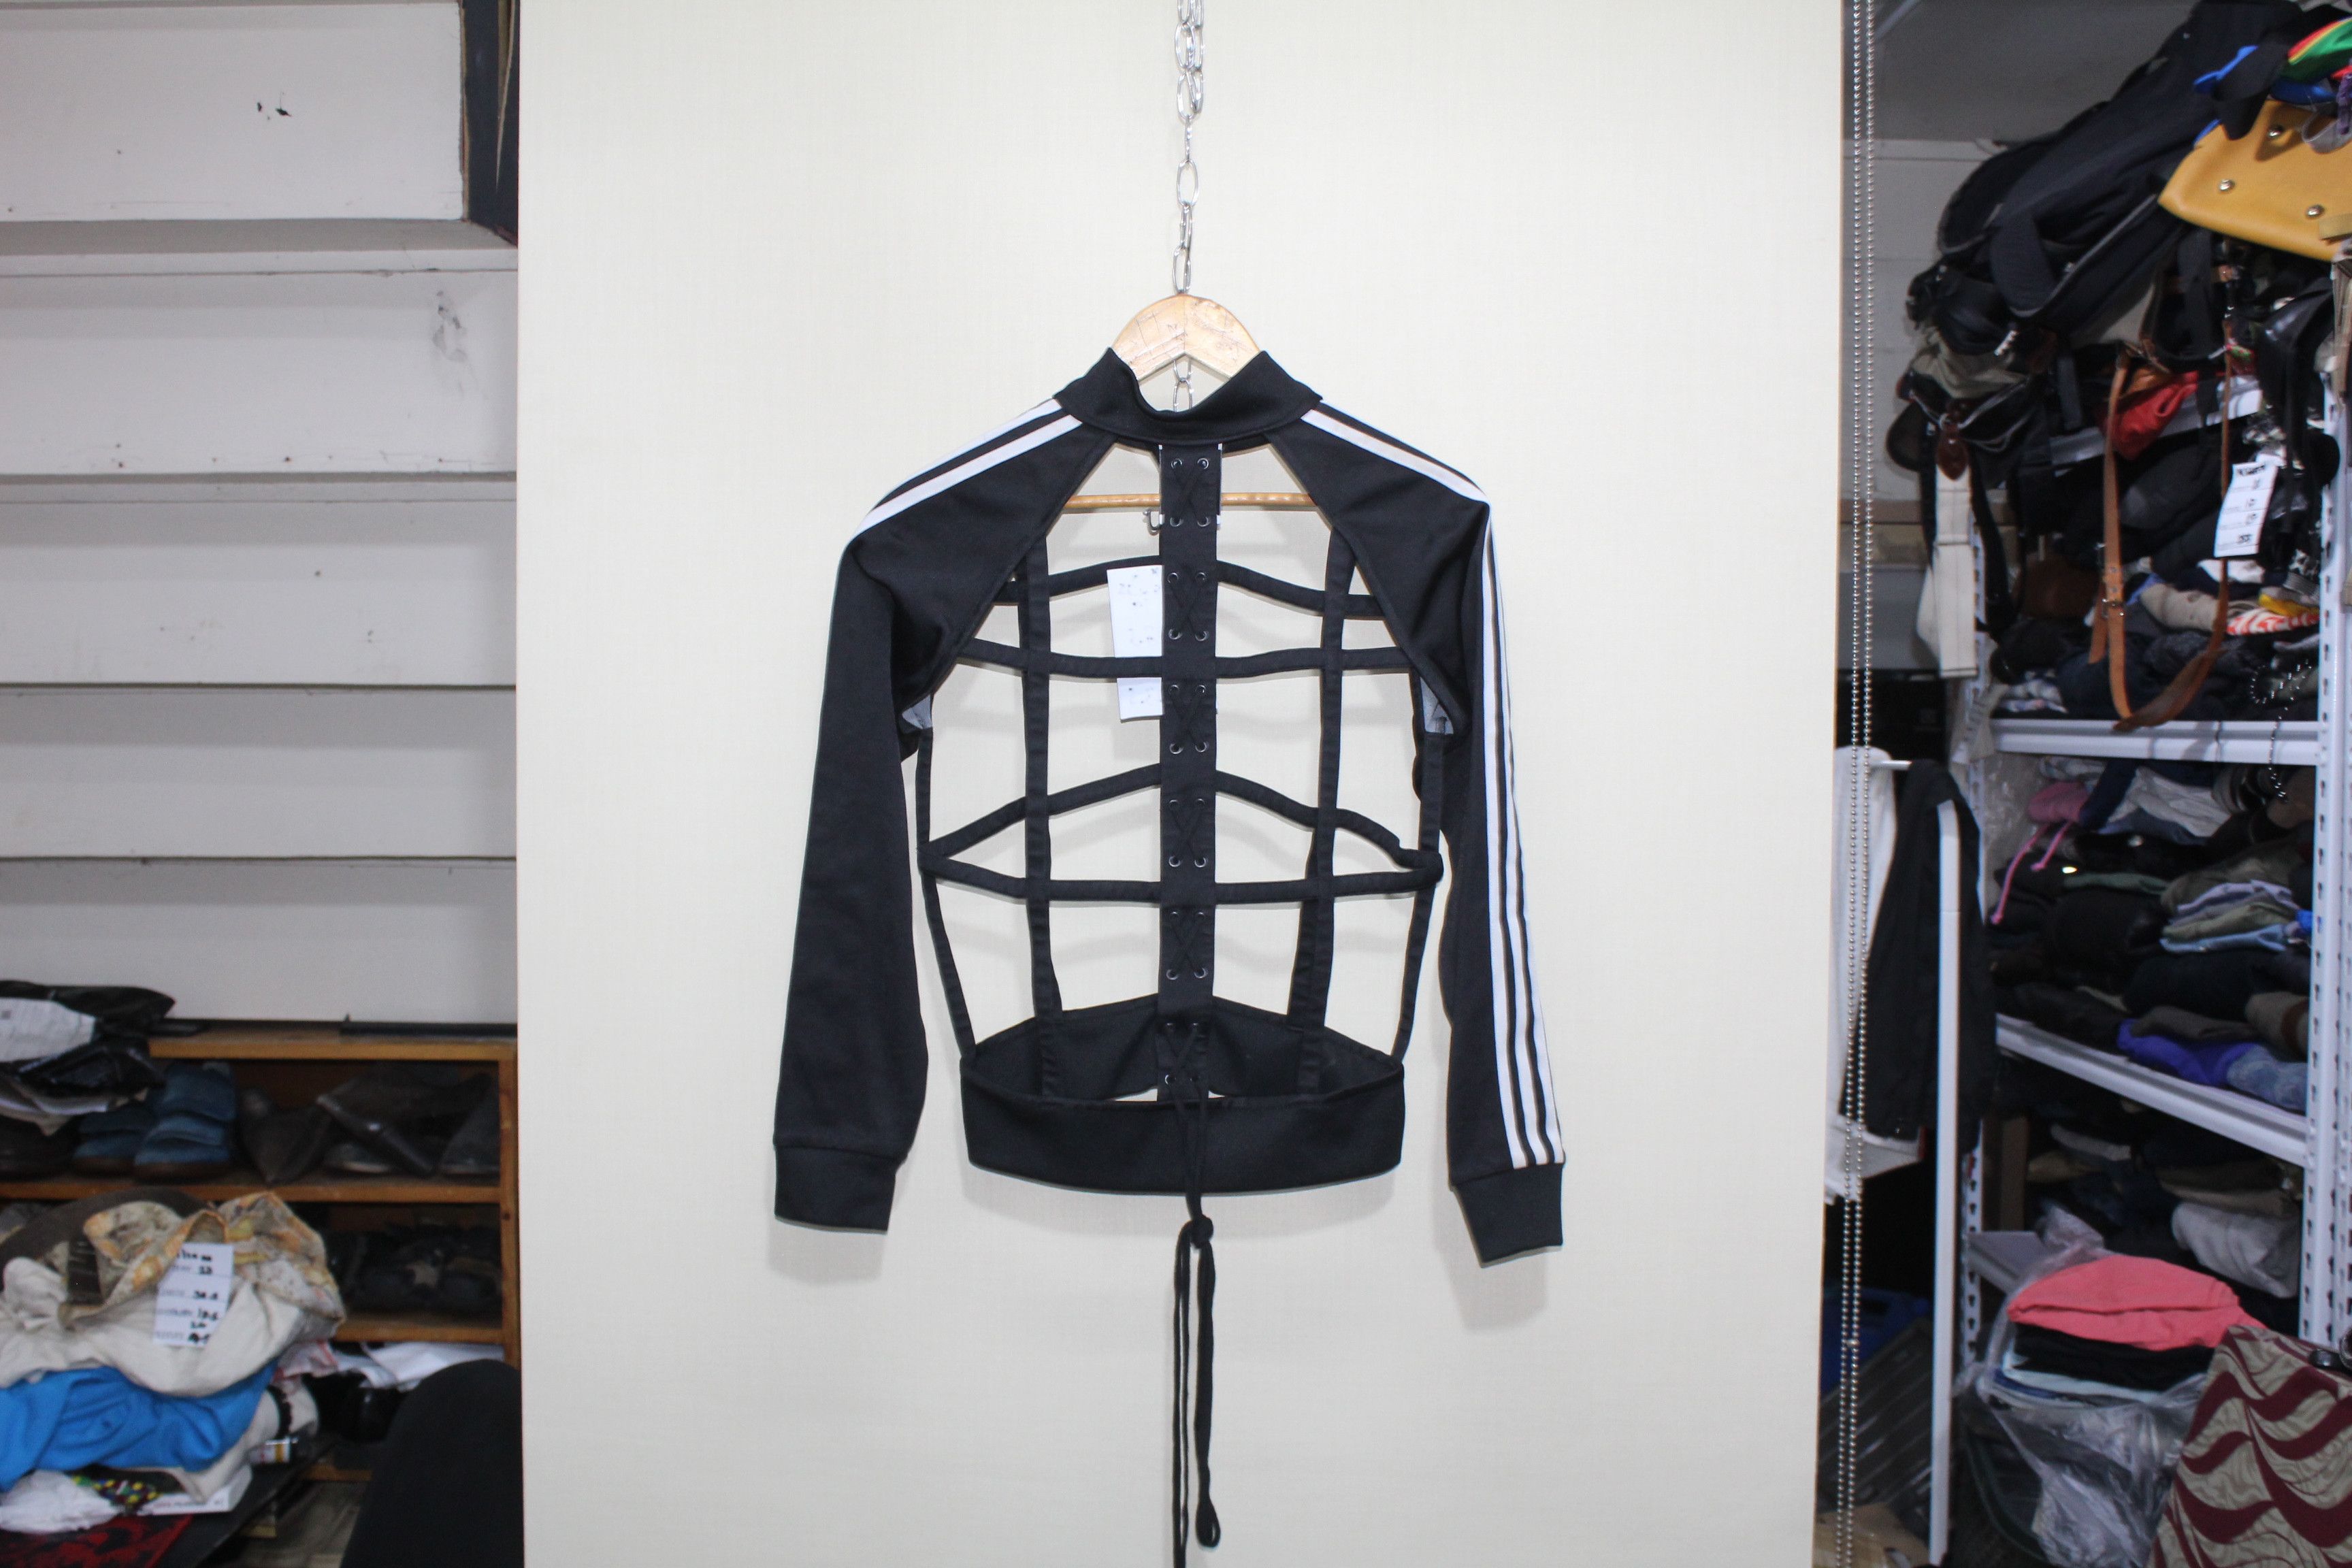 Adidas Cage jacket Size US S / EU 44-46 / 1 - 2 Preview